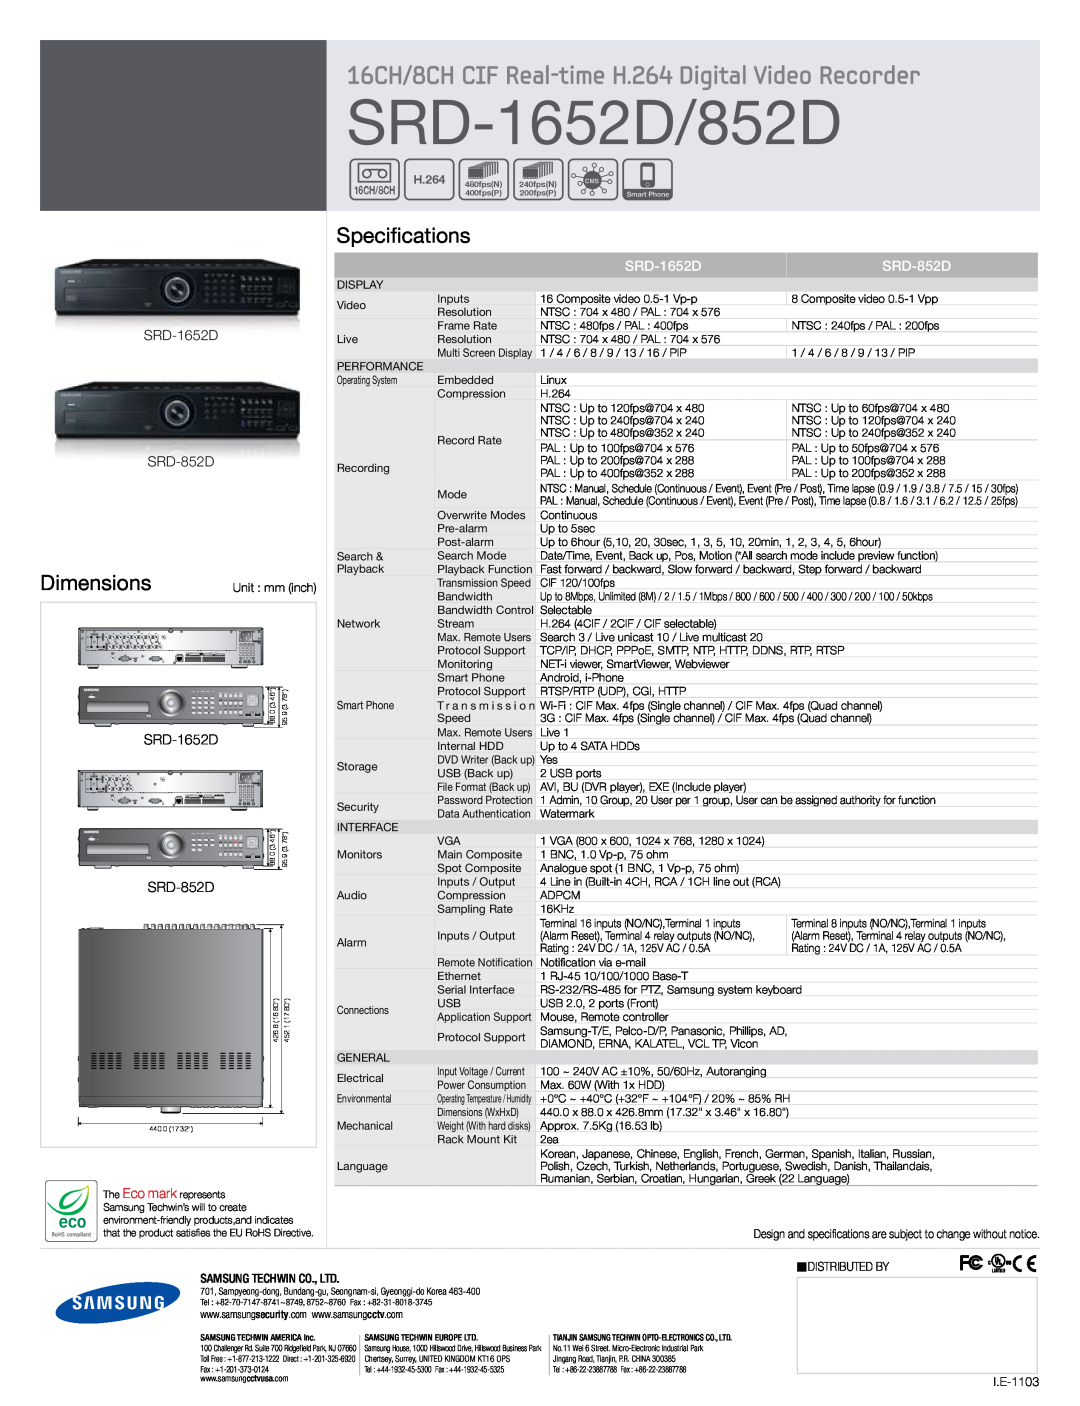 Samsung manual SRD-1652D/852D, 16CH/8CH CIF Real-time H.264 Digital Video Recorder, Dimensions, Specifications, SRD-852D 